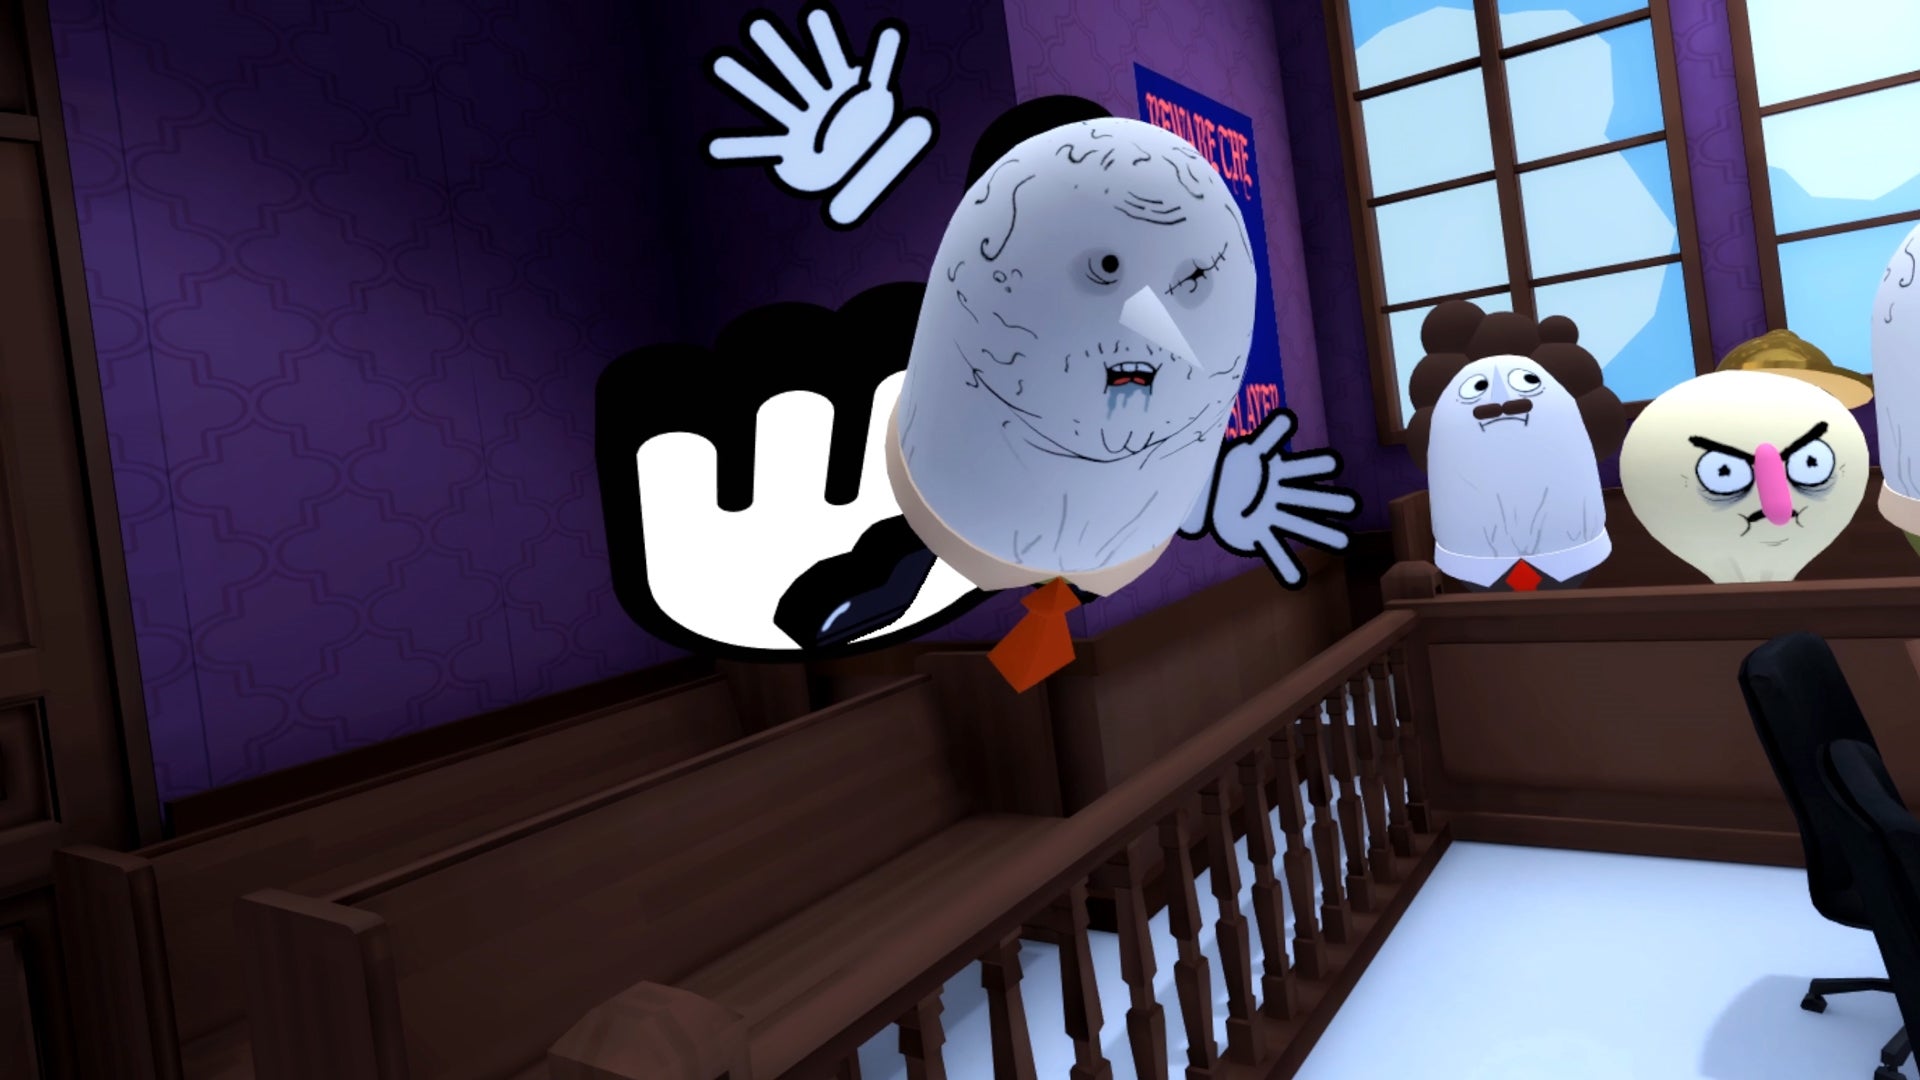 Animated characters in a courtroom from the game Accounting+.